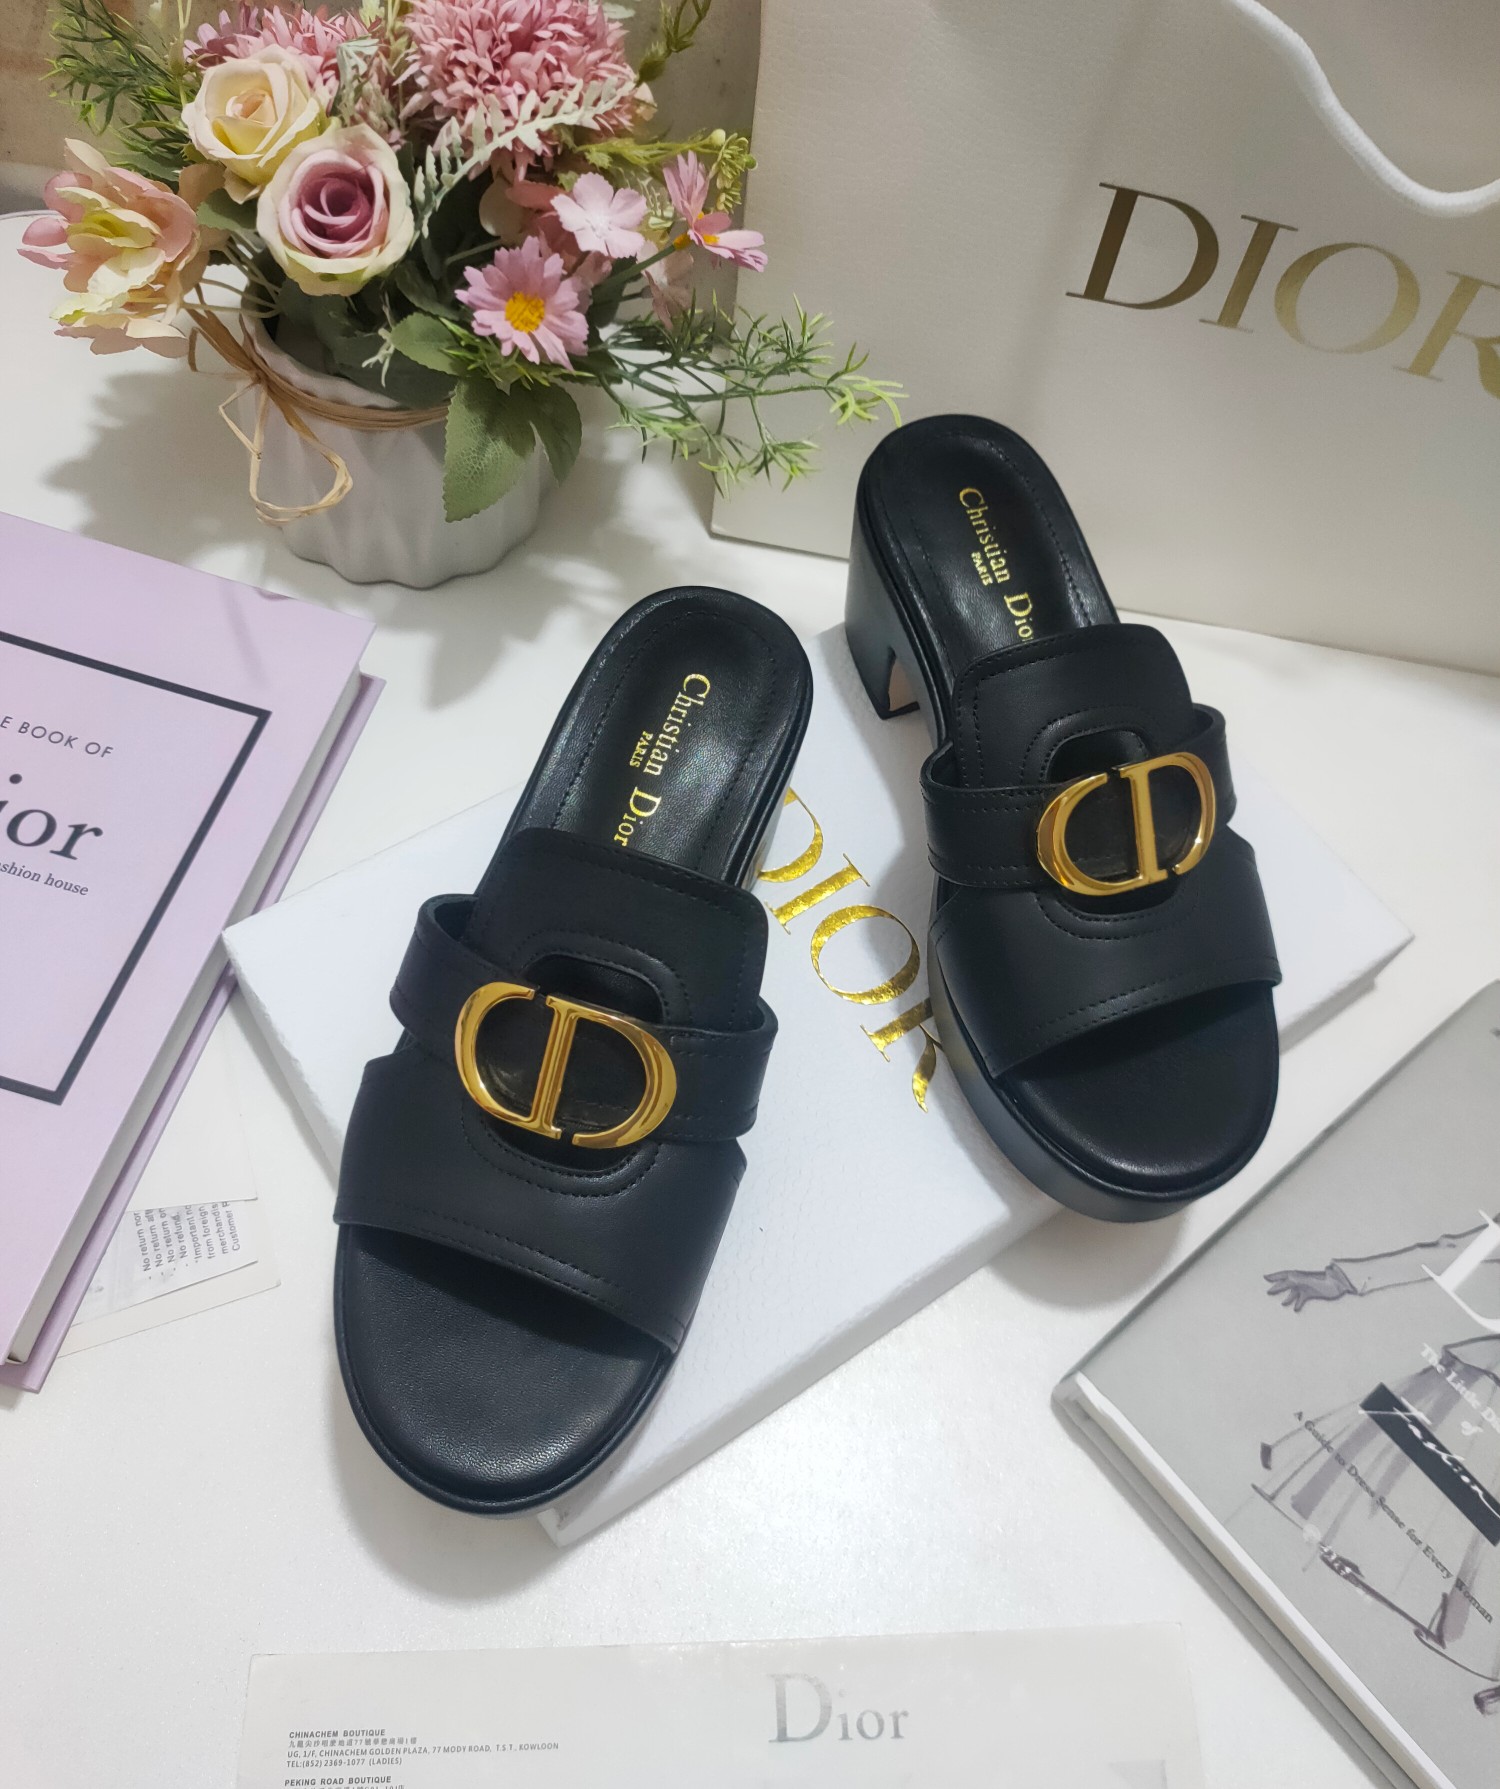 Dior Shoes Sandals Slippers Openwork All Copper Calfskin Cowhide Patent Leather Sheepskin Spring Collection